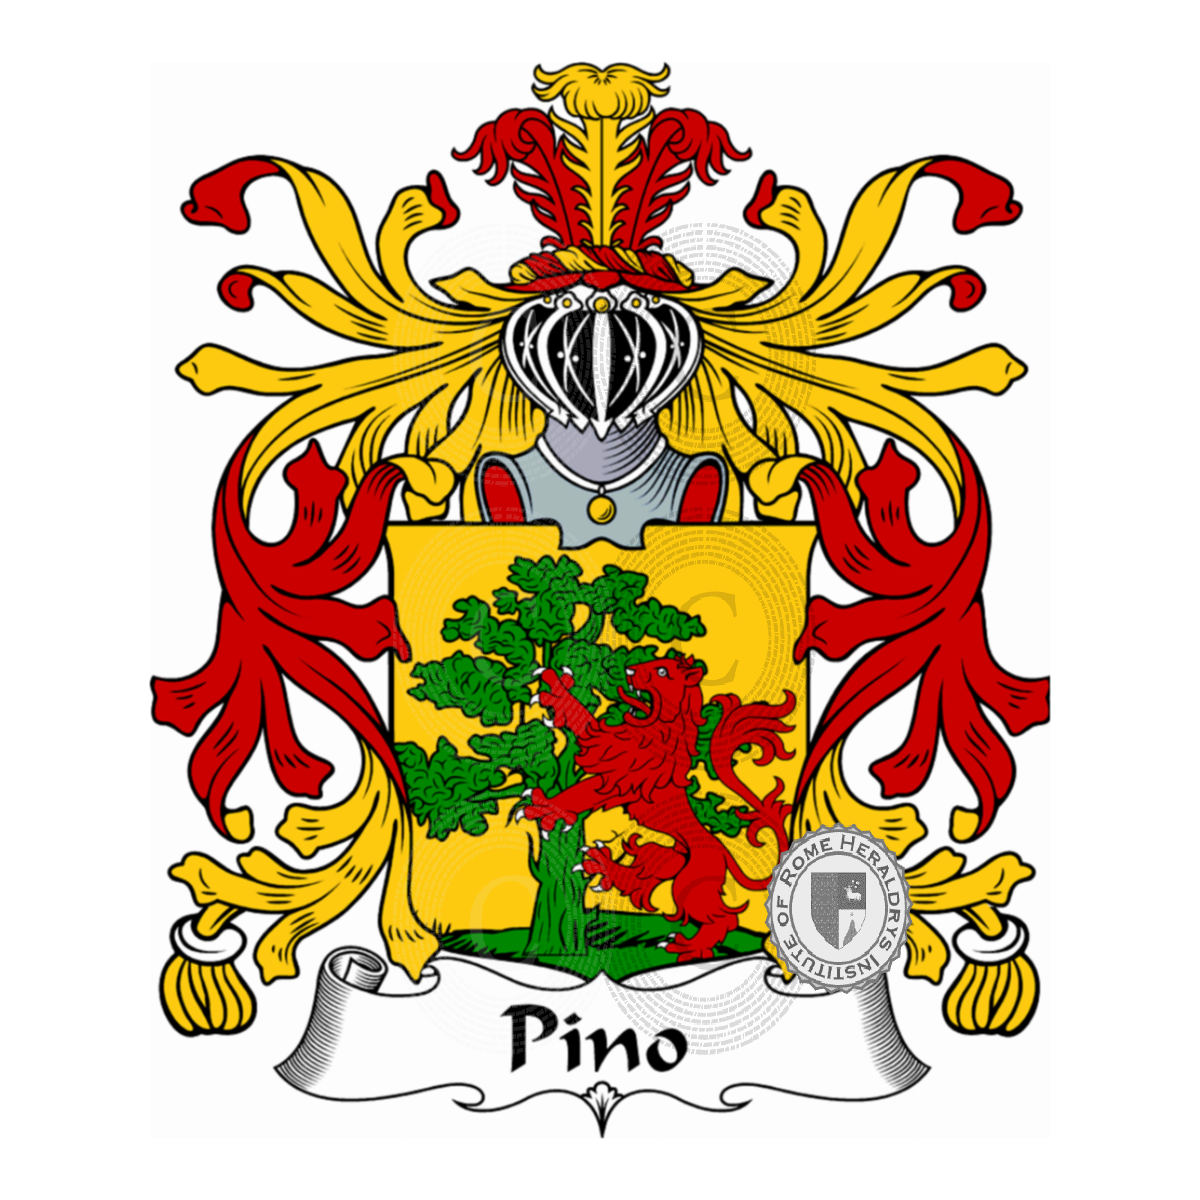 Wappen der FamiliePino, del Pino,Pinese,Pinos